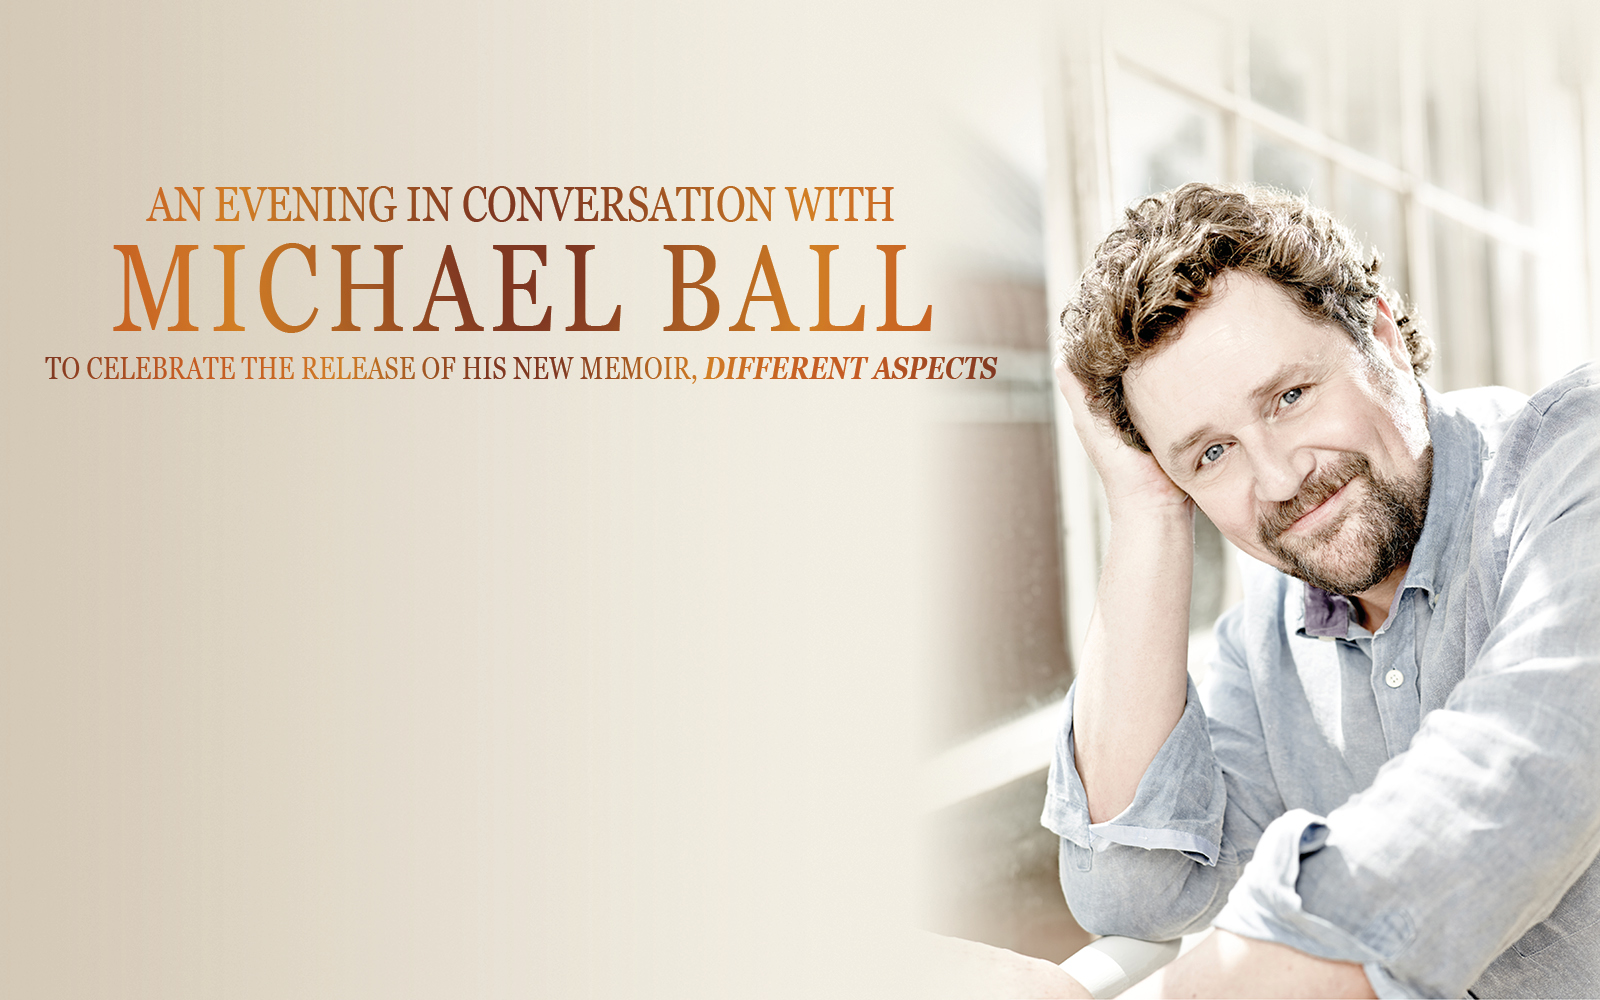 An Evening in Conversation with Michael Ball